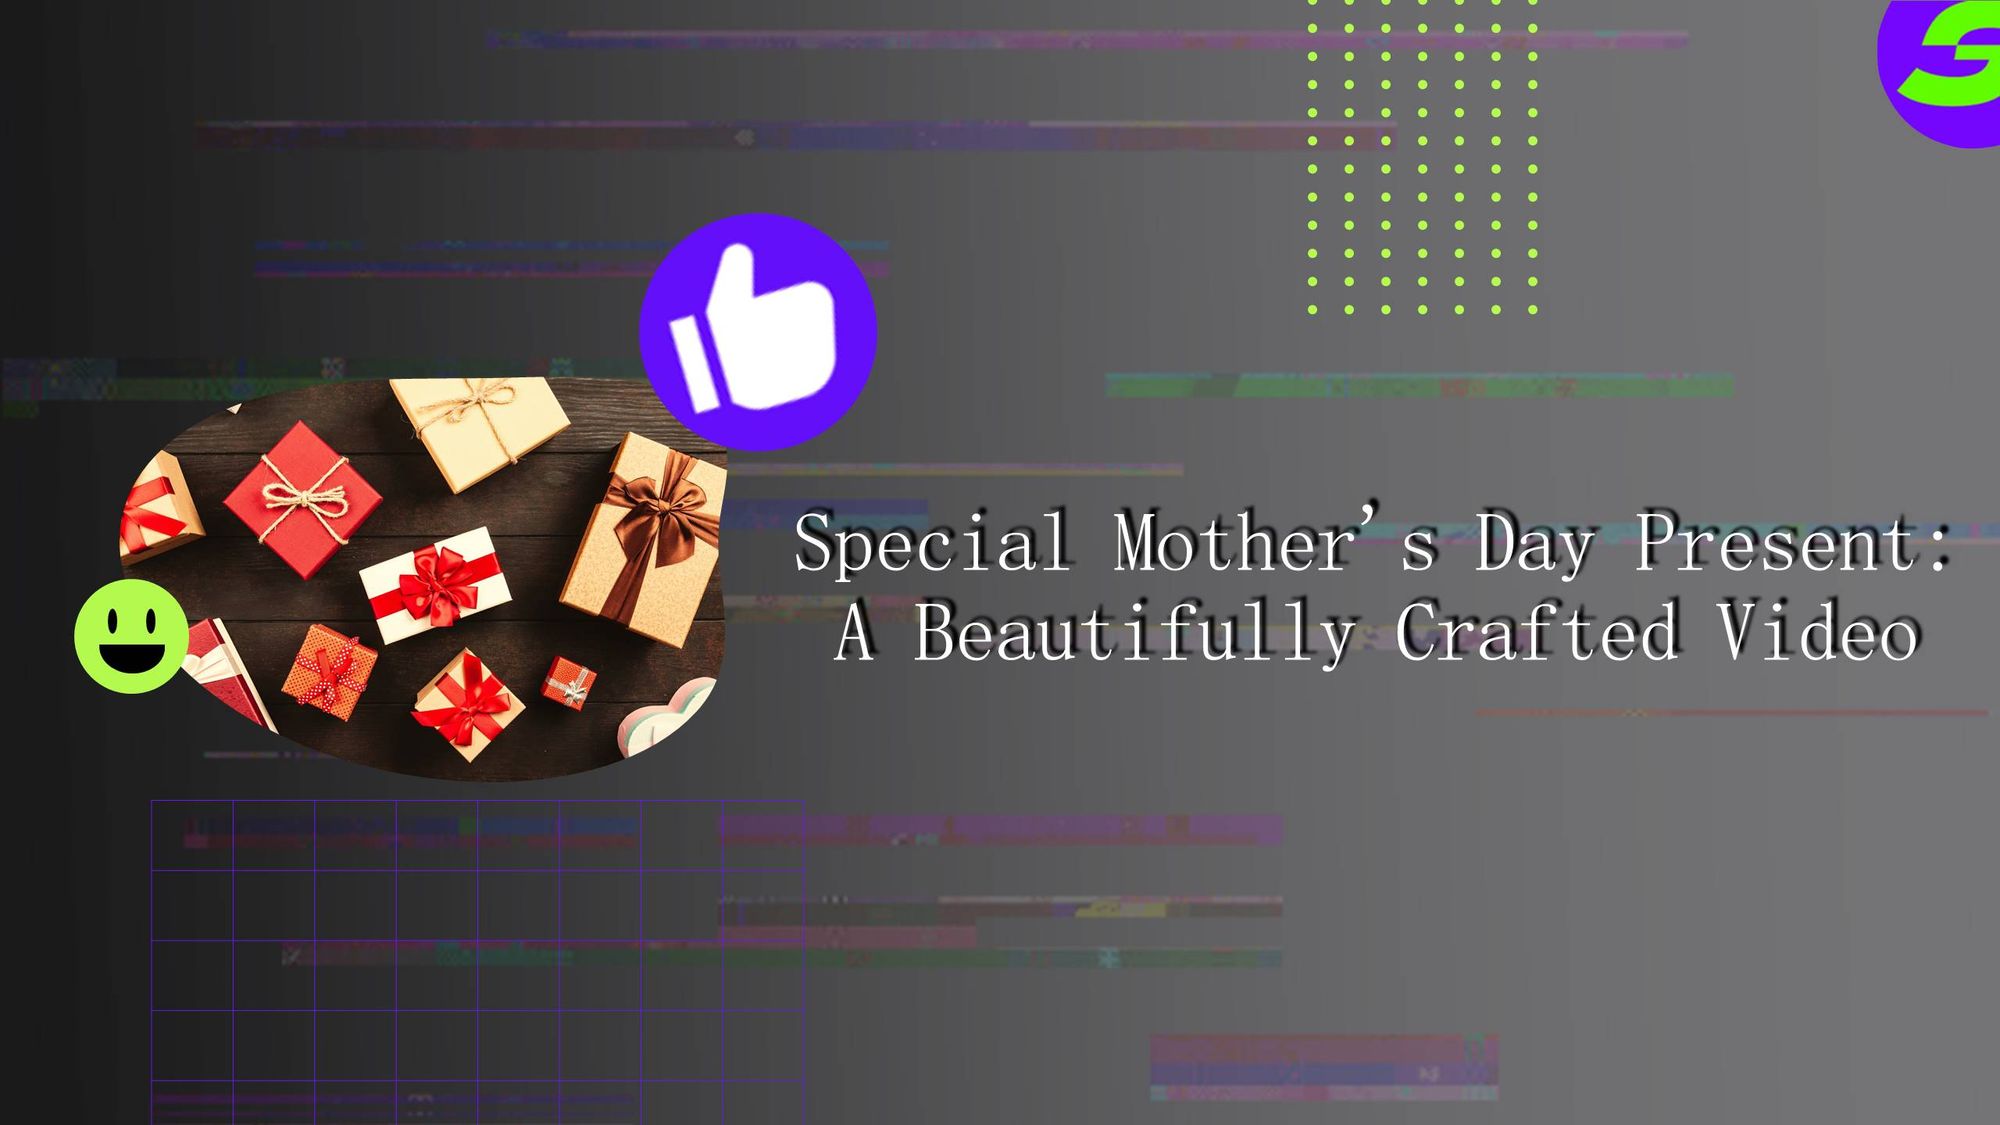 Use Free video editor to Create Special Mother's Day present